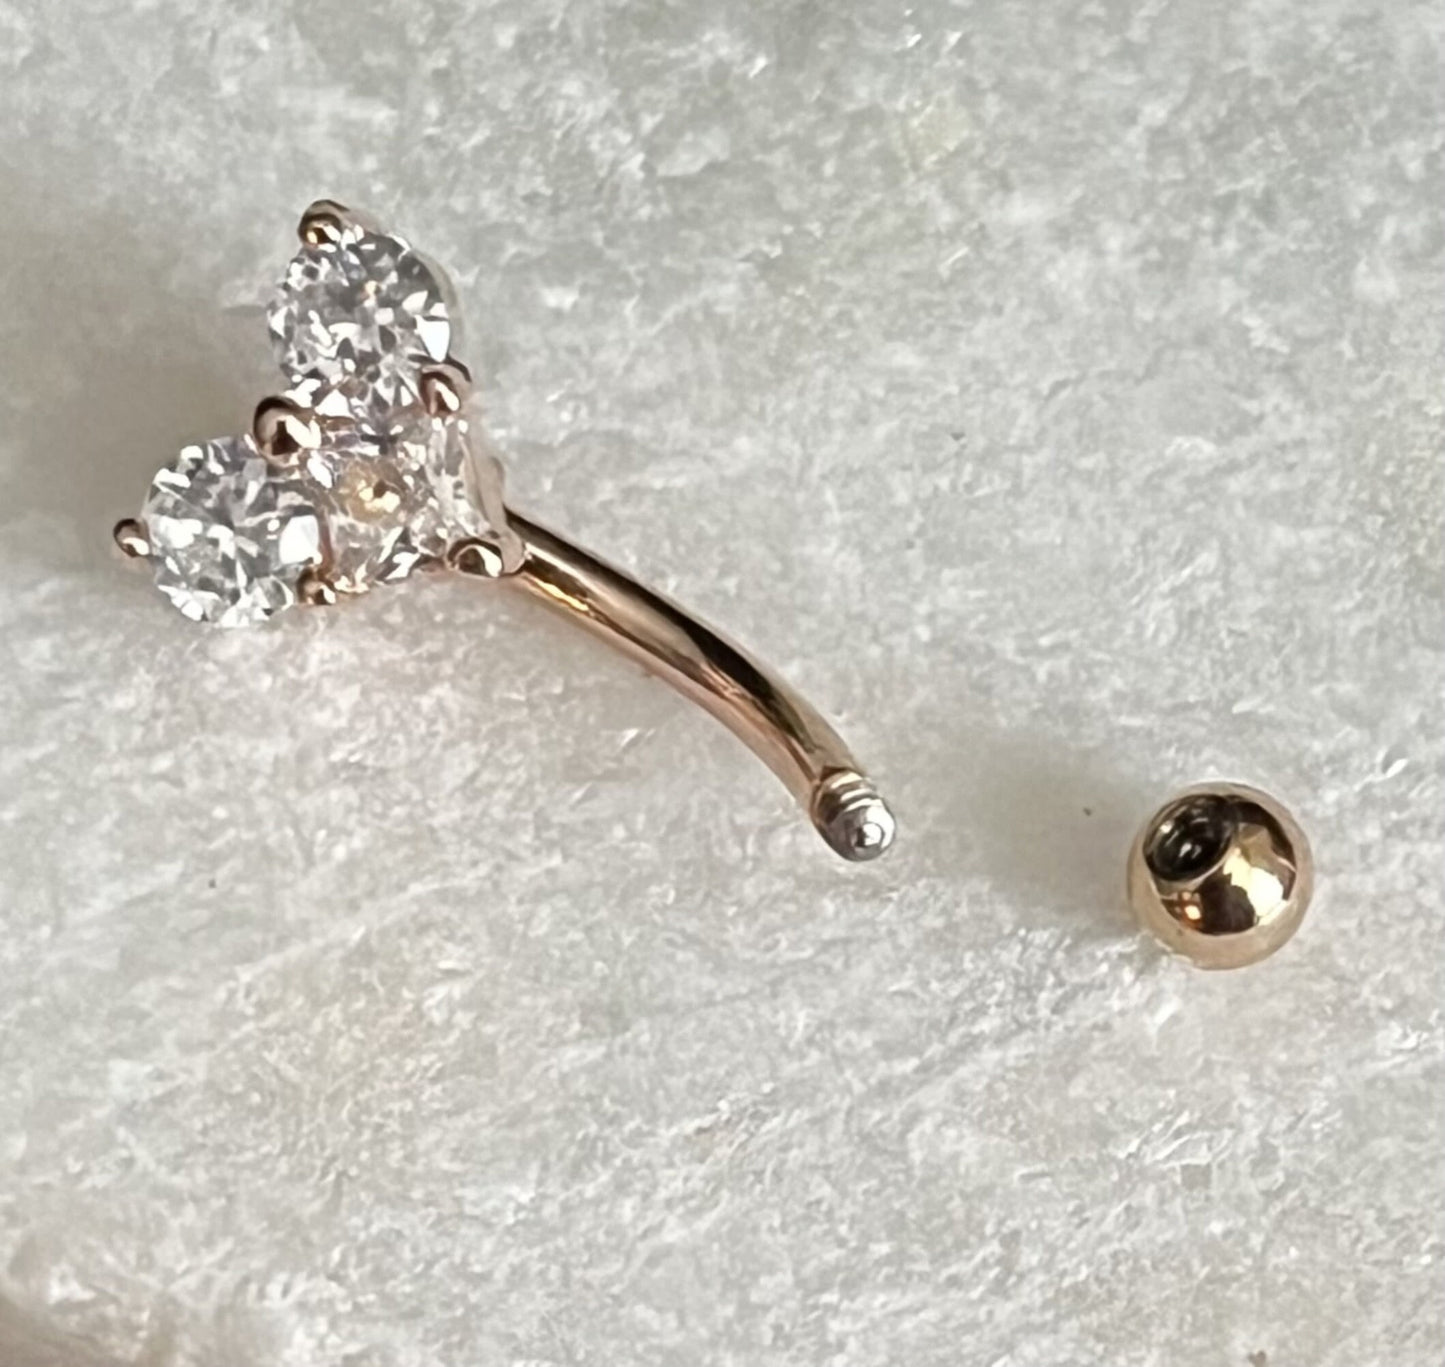 1 Brilliant Three CZ Gem Heart Eyebrow Ring with Curved Barbell - 16g (1.2mm), length 5/16" (8mm) - Silver, Gold or Rose Gold available!